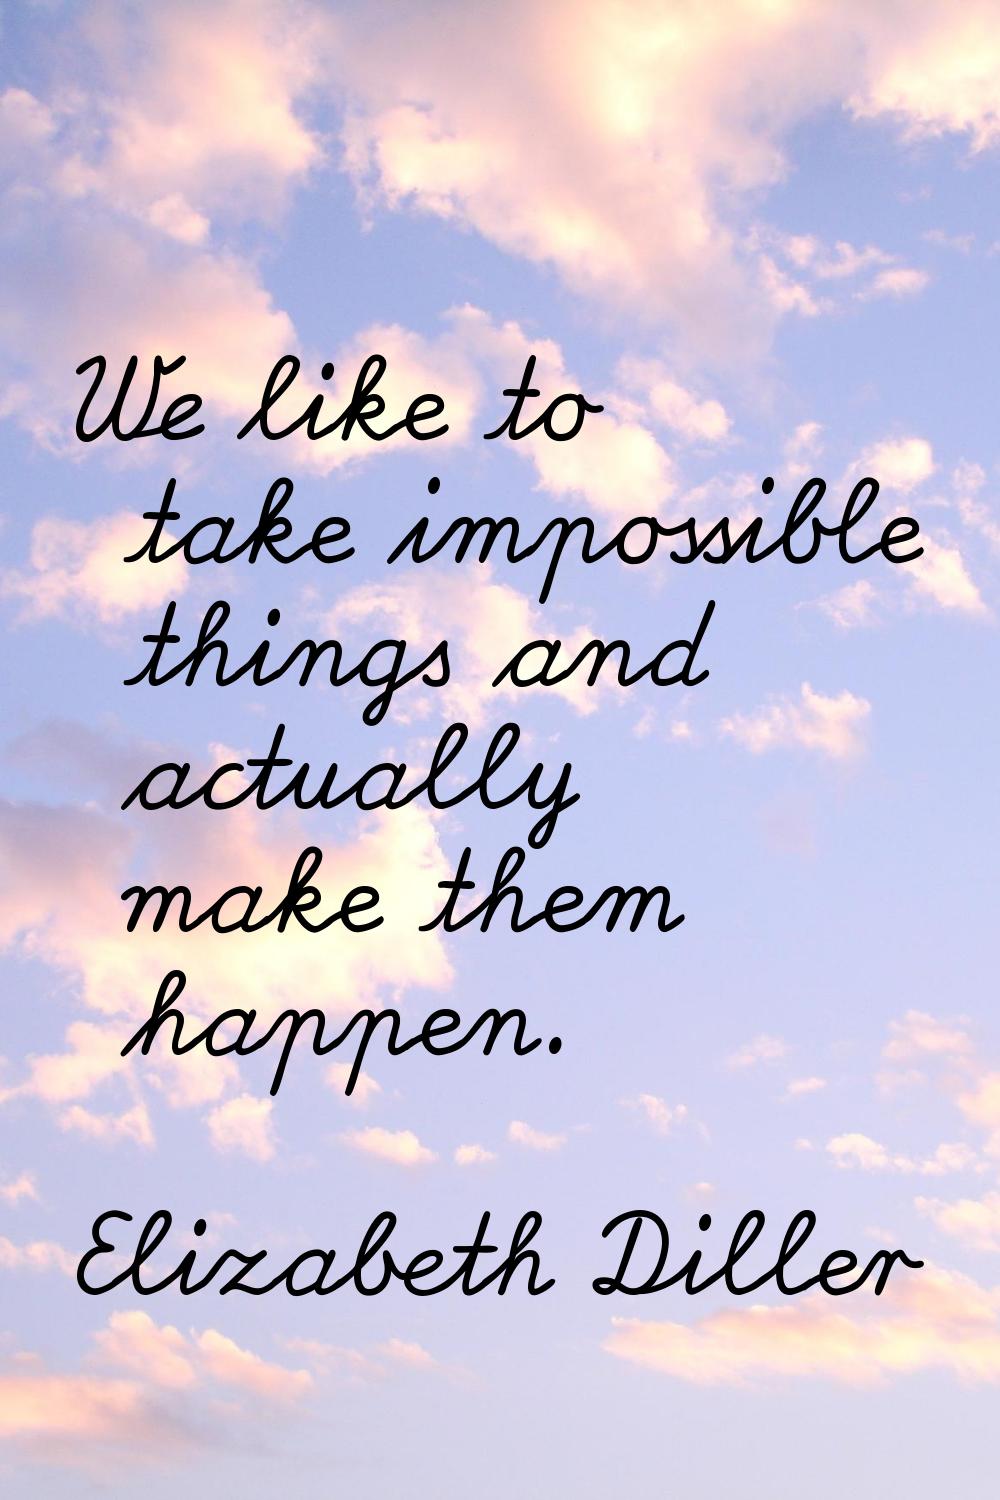 We like to take impossible things and actually make them happen.